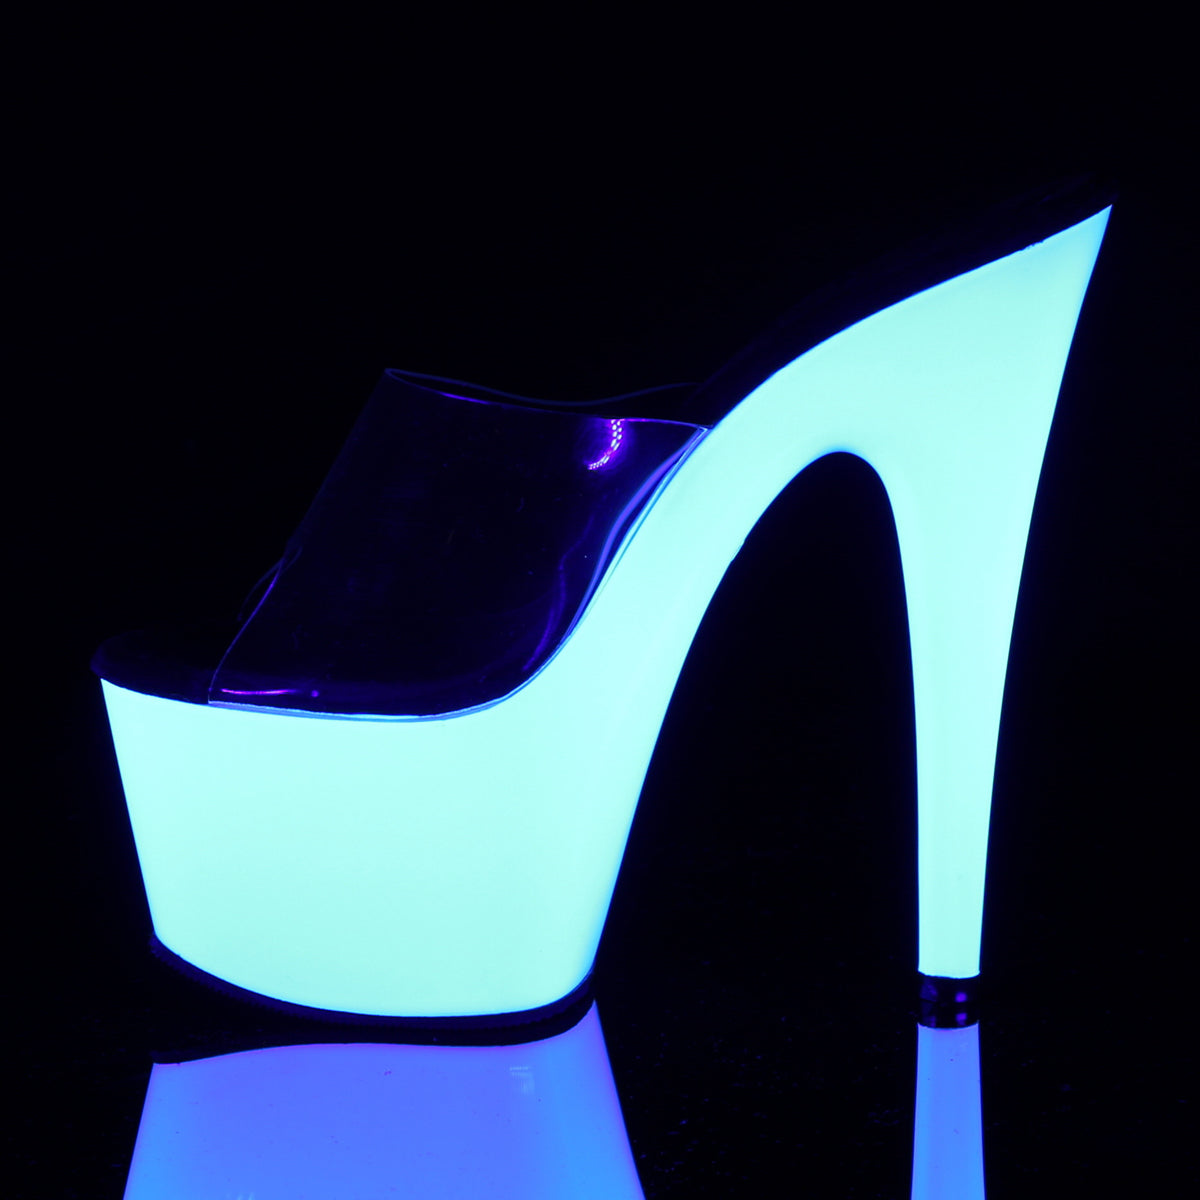 ADORE-701UV 7" Clear Neon White Strippers Platform Sandals-Pleaser- Sexy Shoes Pole Dance Heels